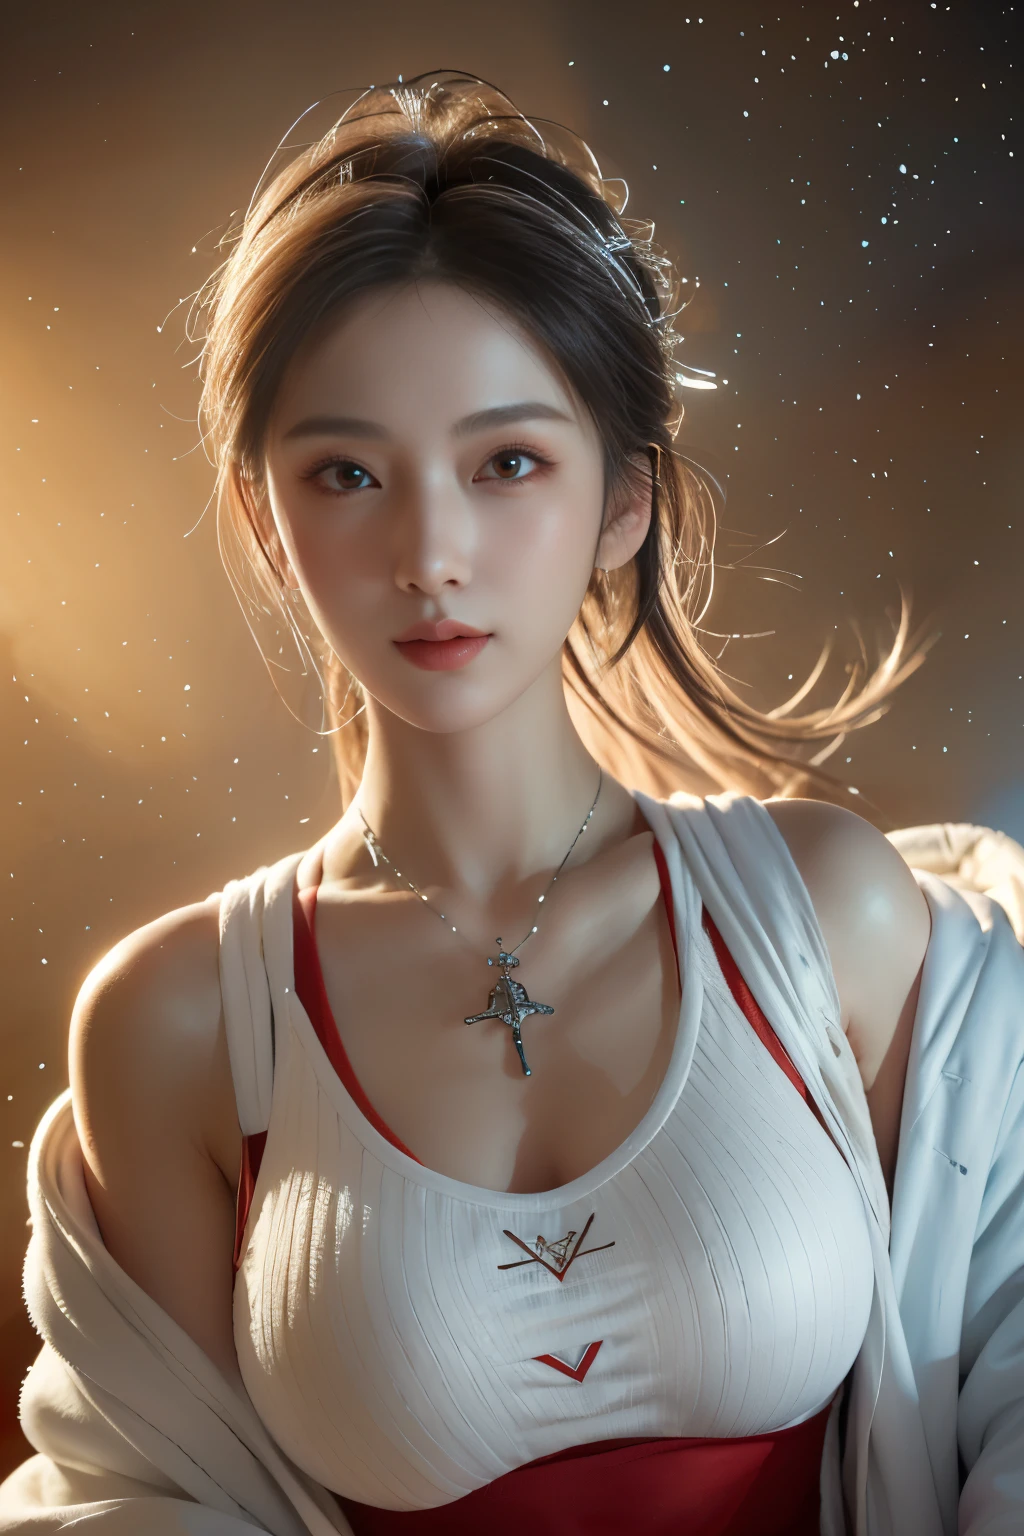 Masterpiece,Game art,The best picture quality,Highest resolution,8K,(A bust photograph),(Portrait),(Head close-up),(Rule of thirds),Unreal Engine 5 rendering works,
20 year old girl,Short hair details,With long bangs,(white hair),red eyes,Elegant and elegant,(Large, full breasts),(Wearing a white coat,Red suspender underwear),shut your mouth,serious yet charming,(scholar),photo poses,Sci-fi style laboratory,white room,
Movie lights，Ray tracing，Game CG，((3D Unreal Engine))，OC rendering reflection pattern